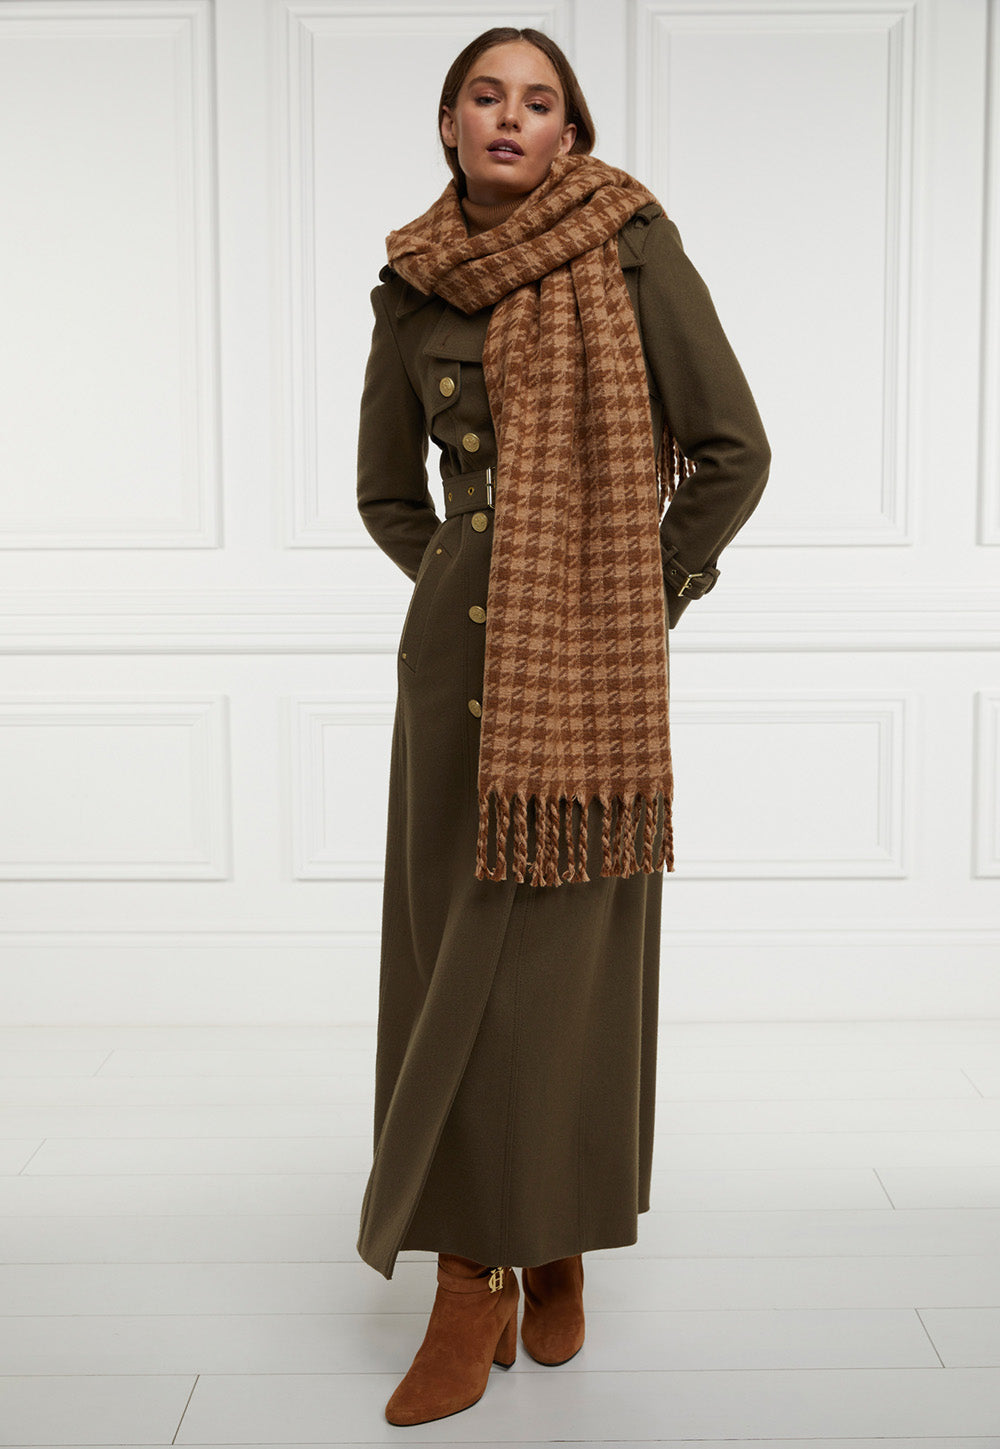 HC Chelsea Scarf - Camel Houndstooth sold by Angel Divine